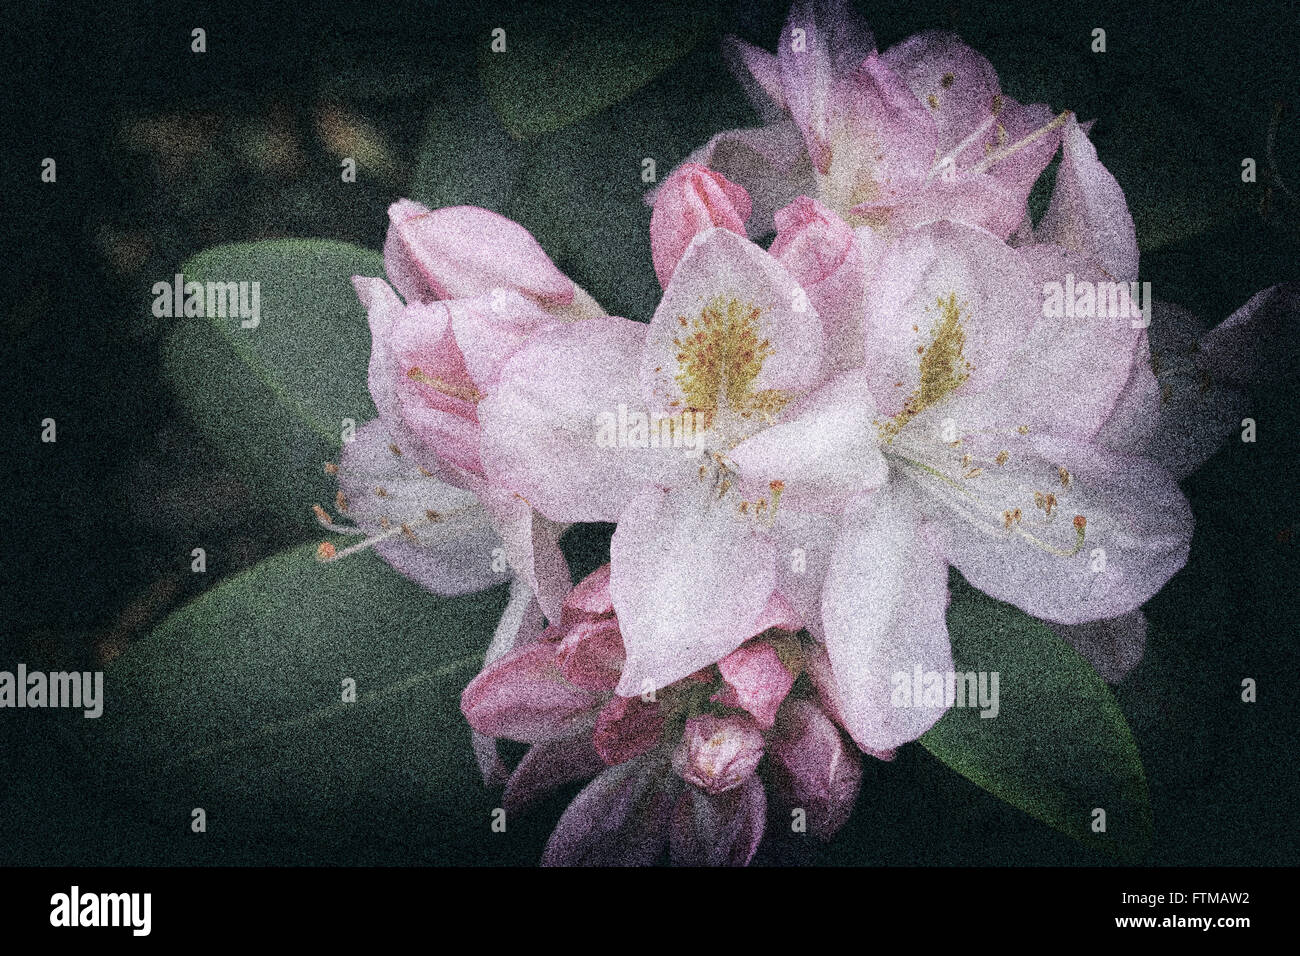 Vintage image of rhododendron blossom in a spring garden. Stock Photo